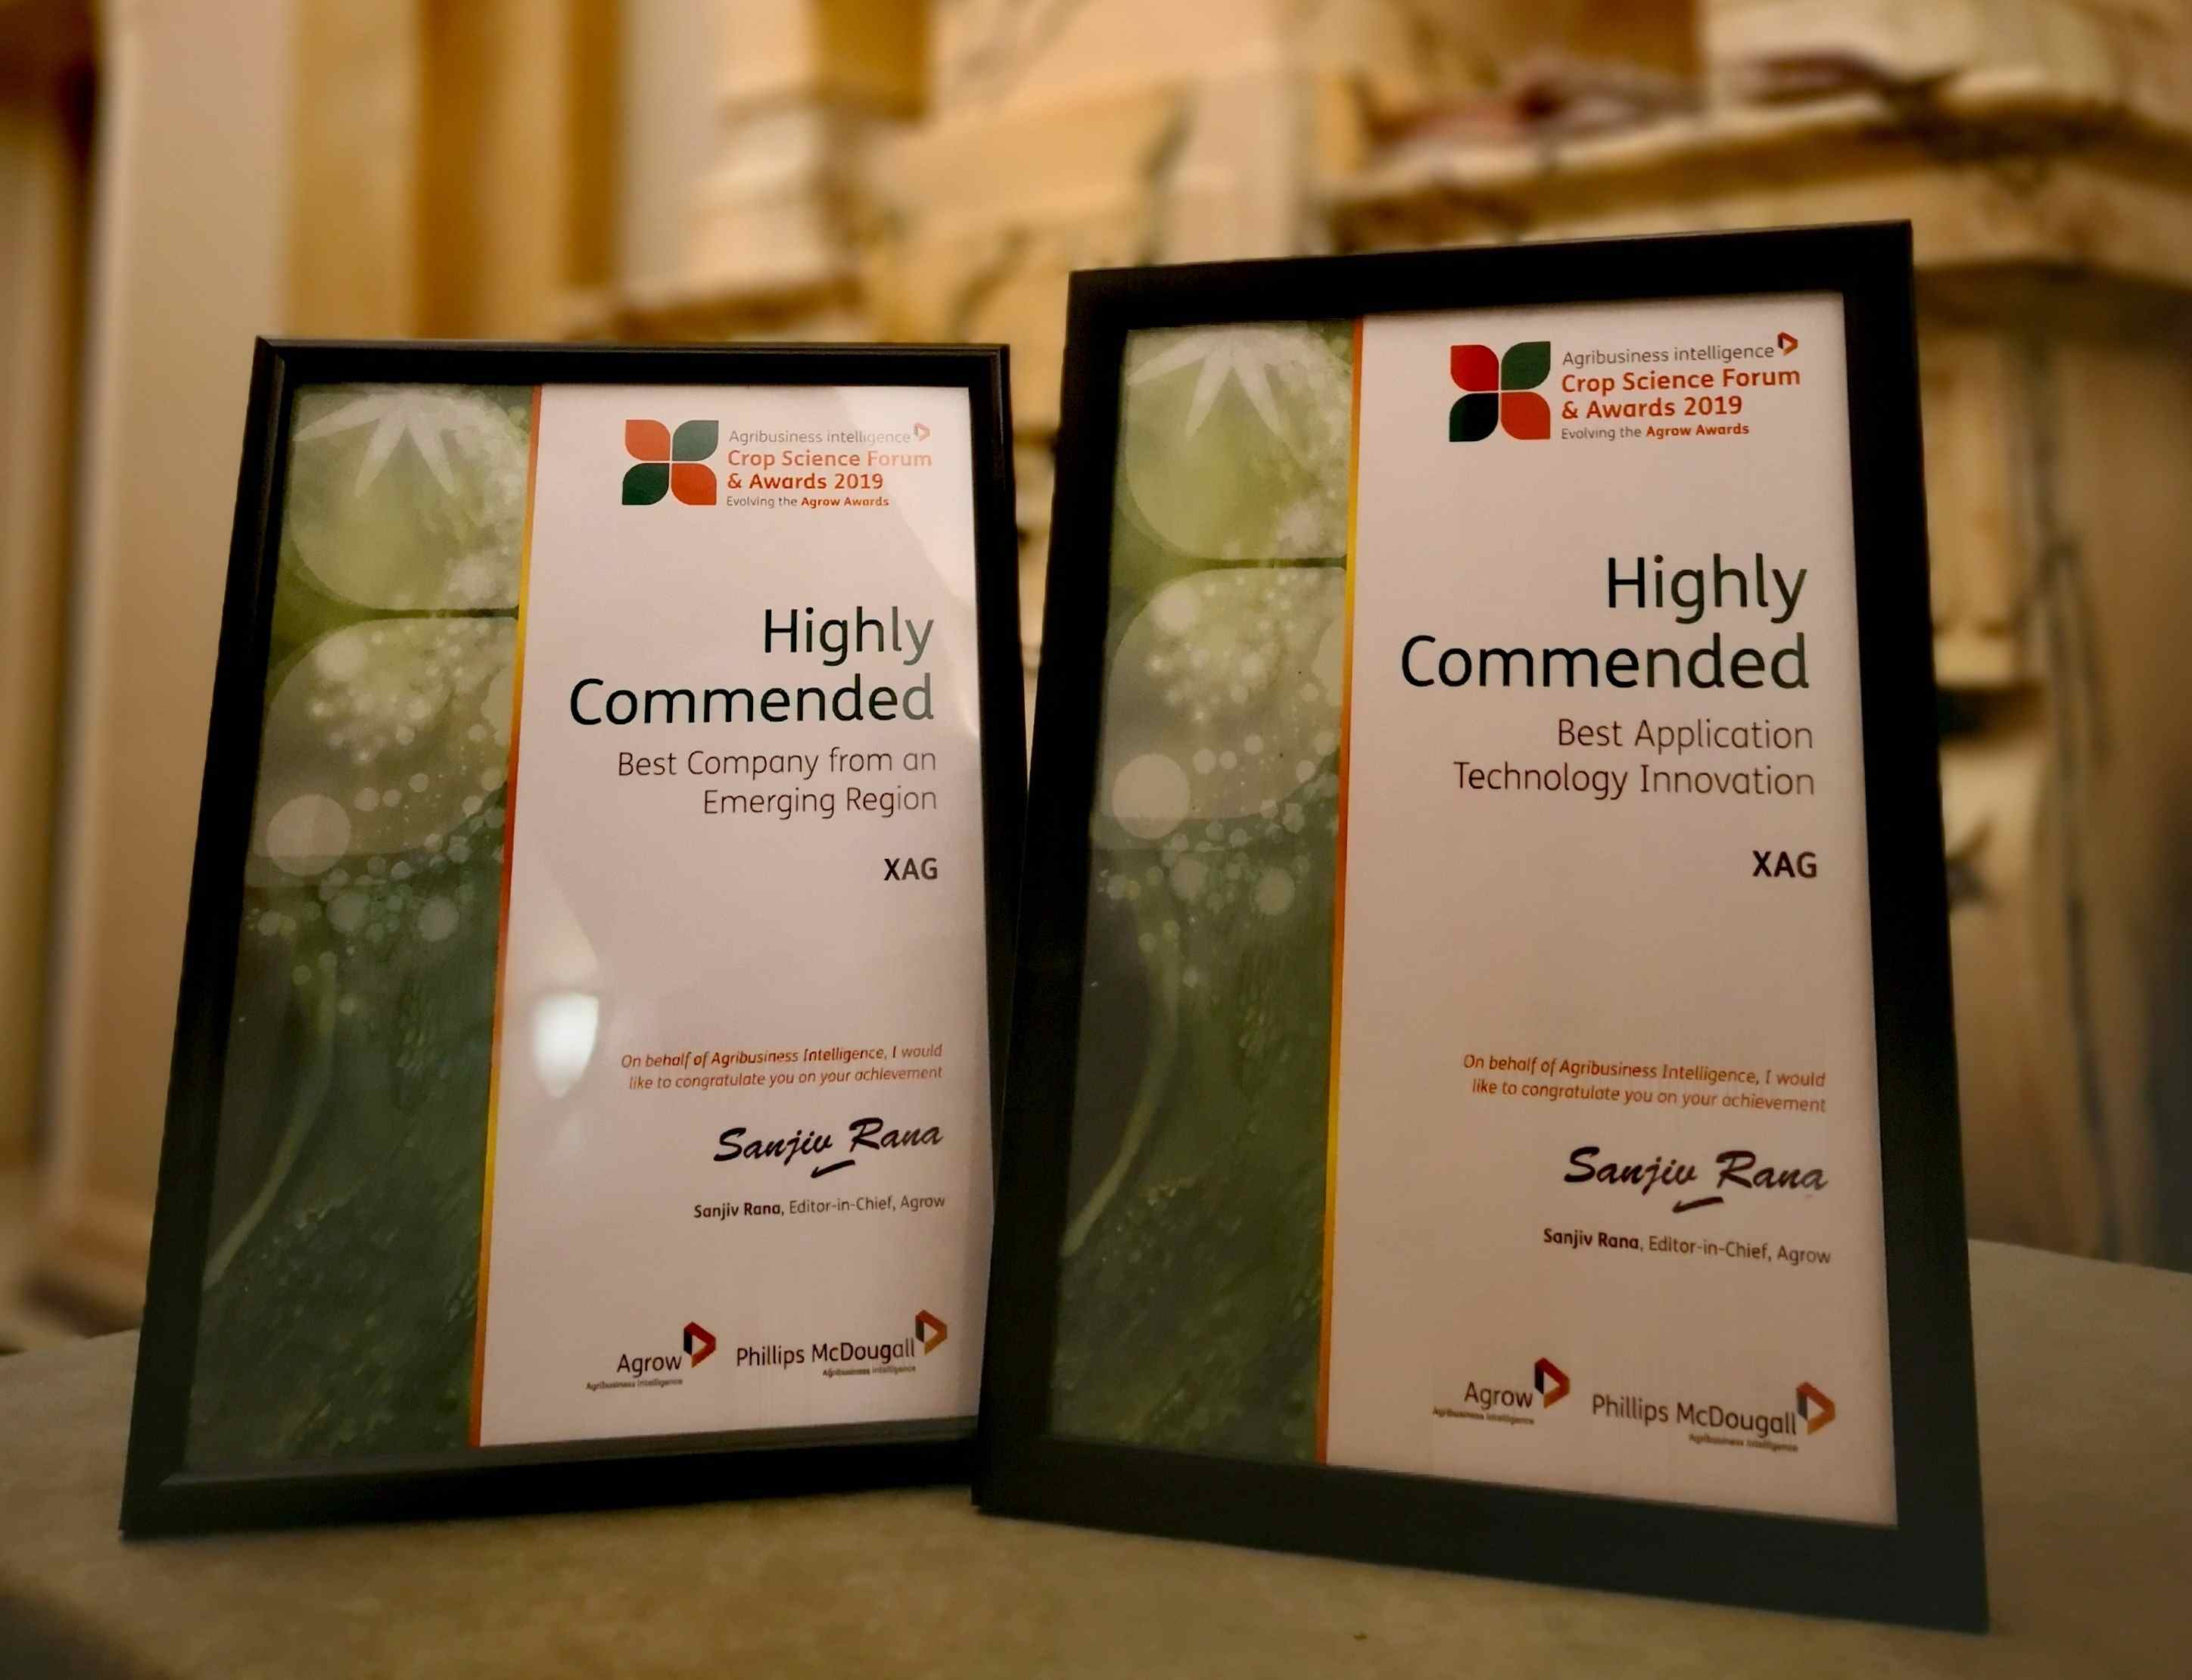 Highly Commended honours